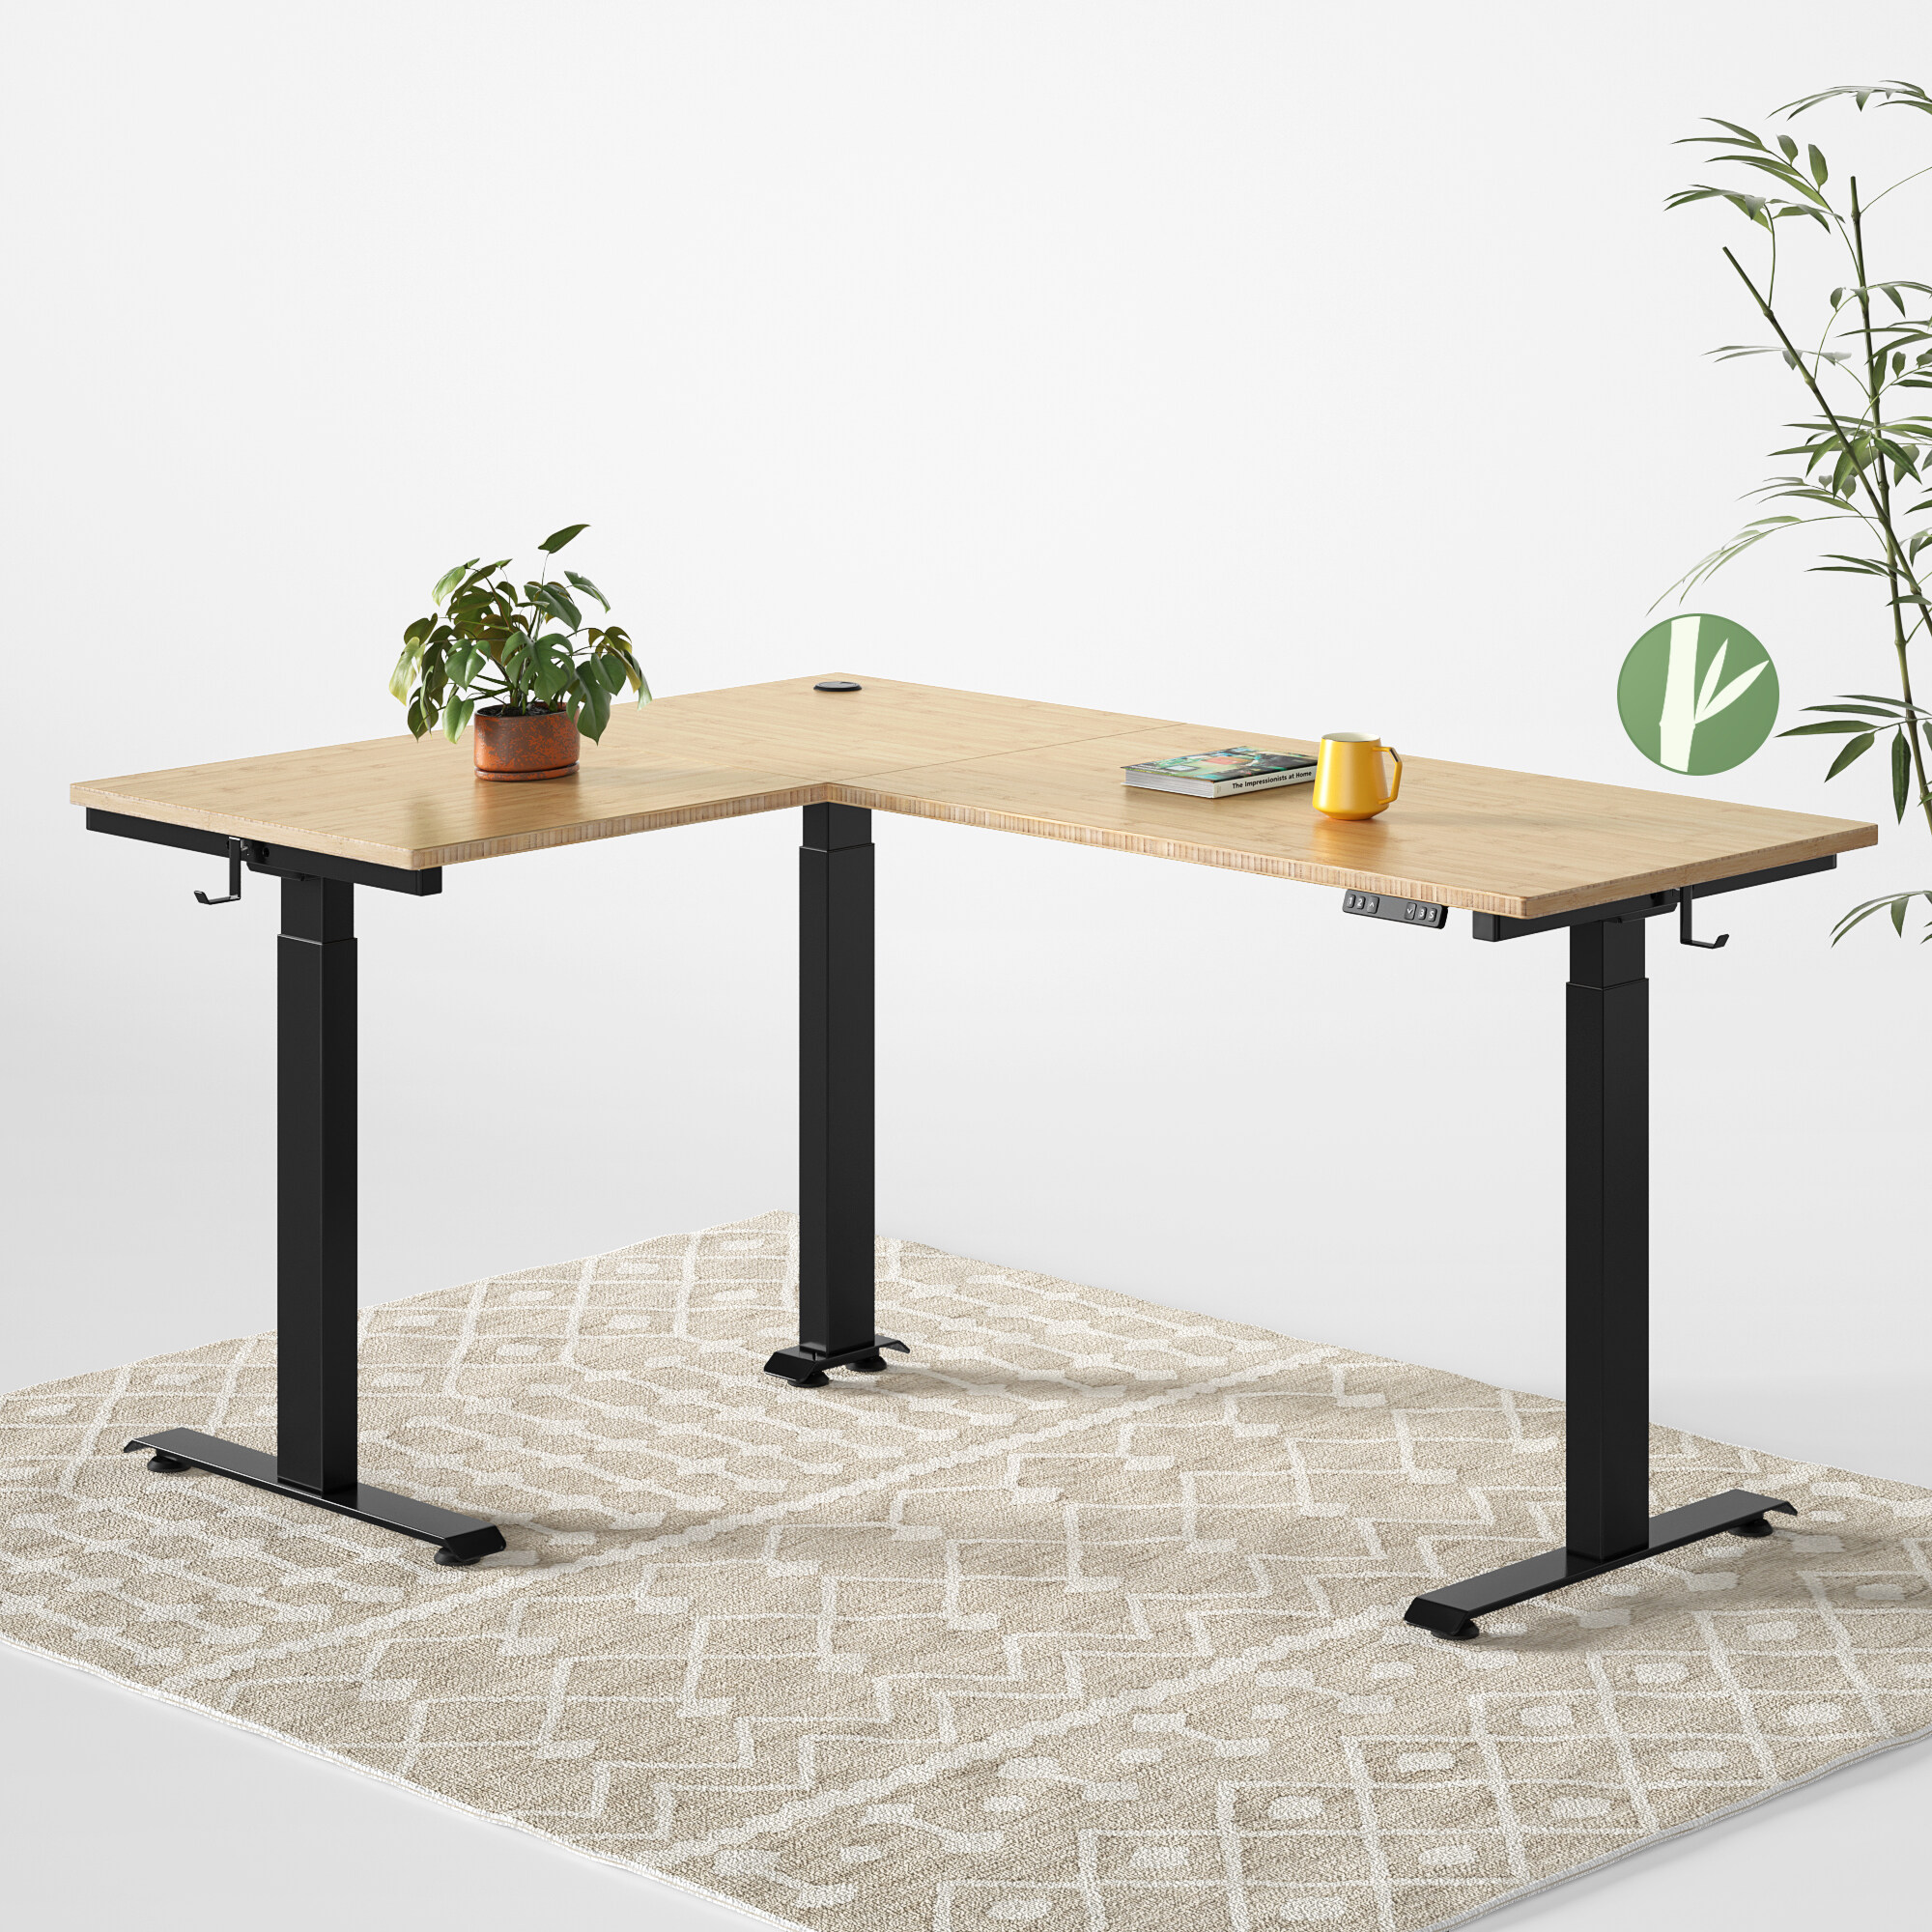 5 The Best L Shaped Standing Desks in 2022 fezibo